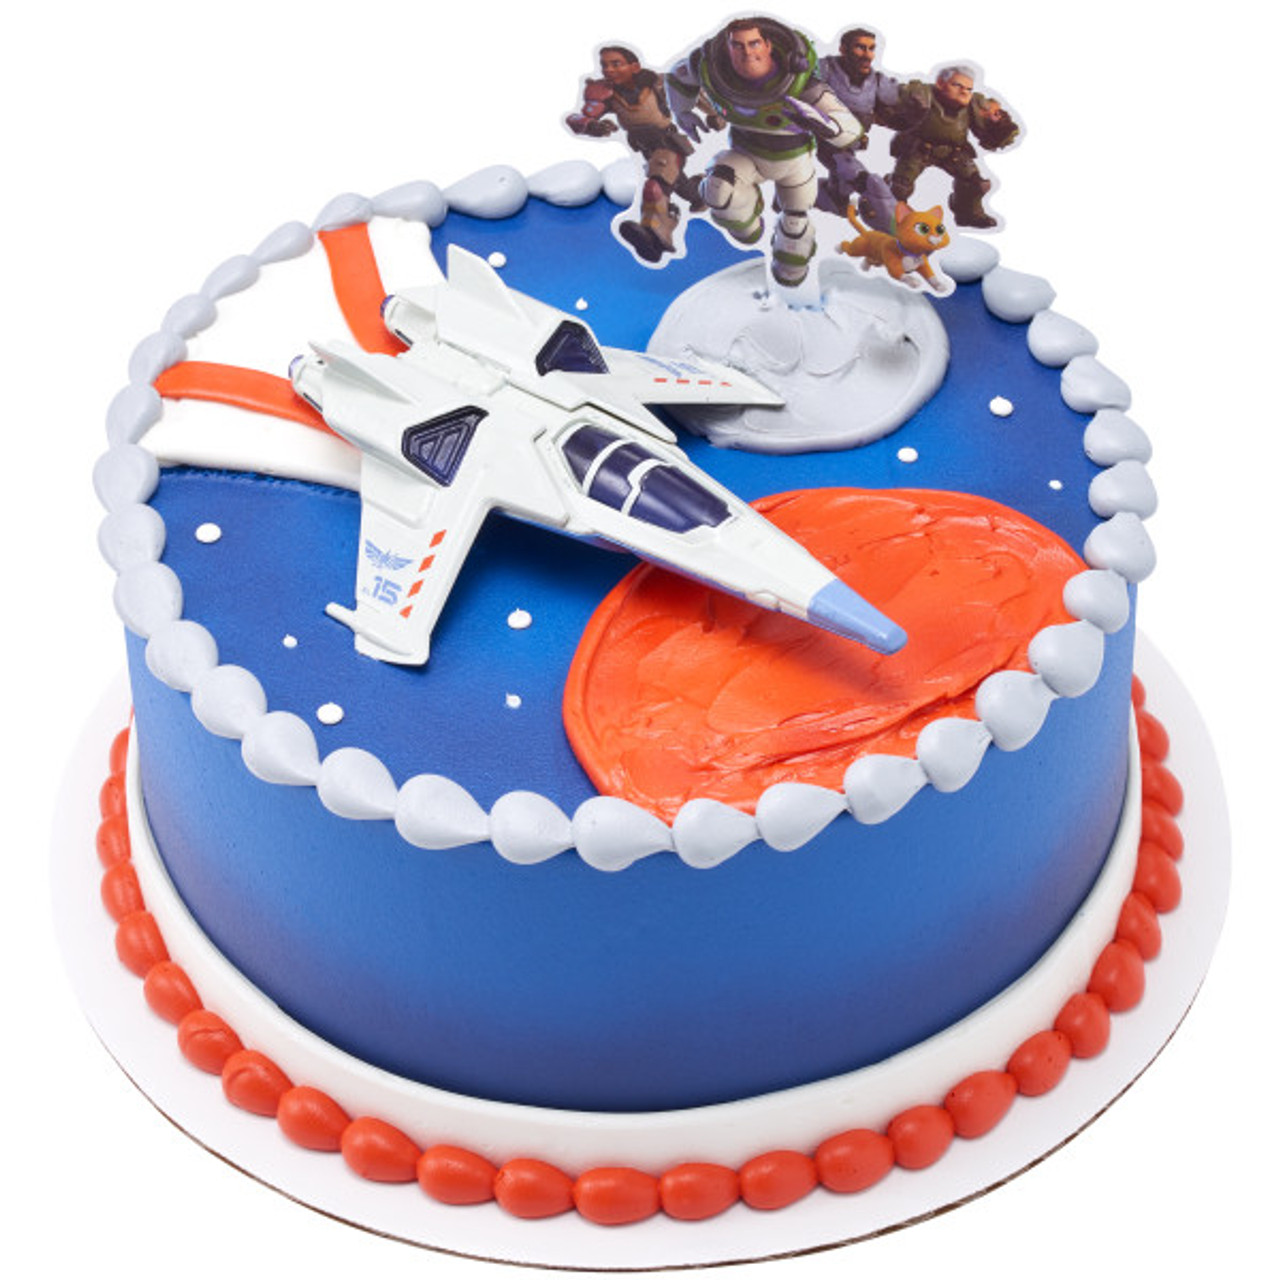 Aircraft cakes - a blast from the past by Lindy Smith